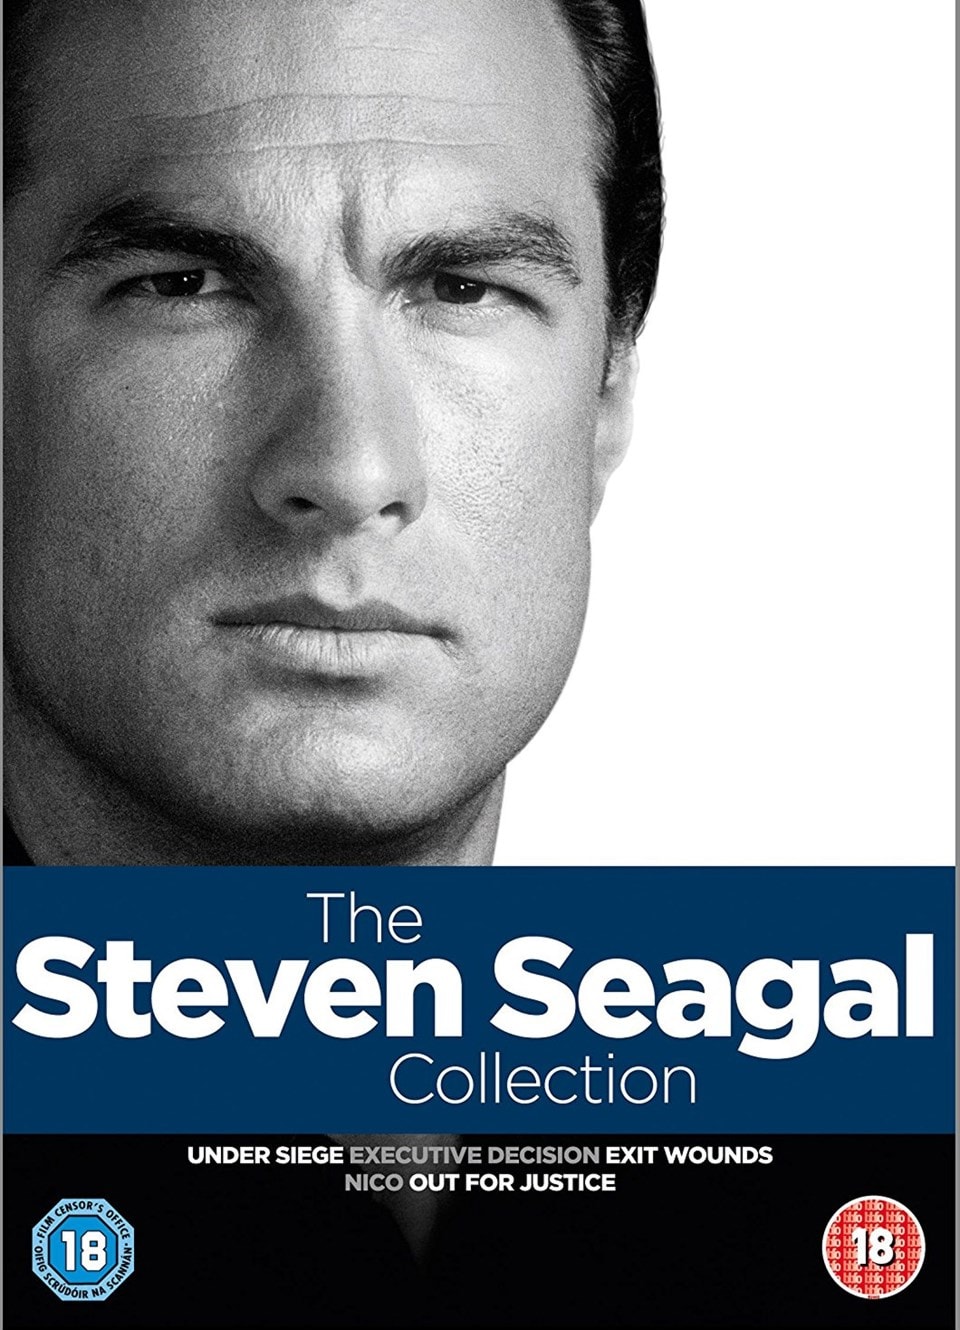 The Steven Seagal Collection Dvd Box Set Free Shipping Over £20 Hmv Store 